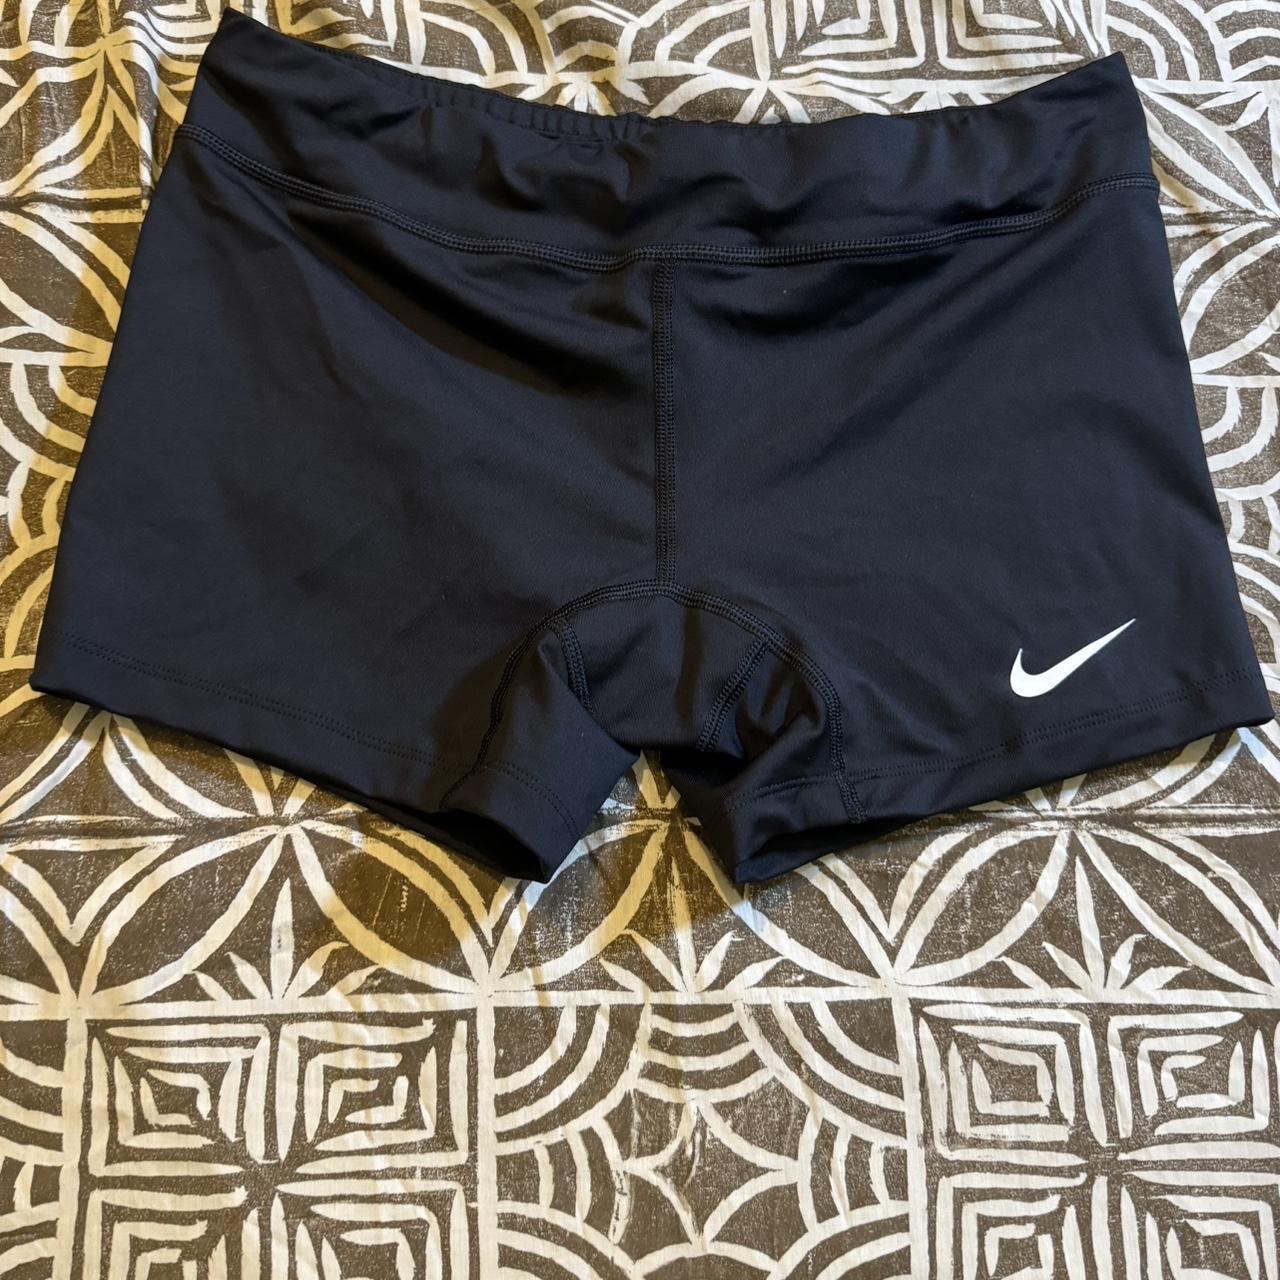 Nike spandex brand new without tag No flaws - Depop